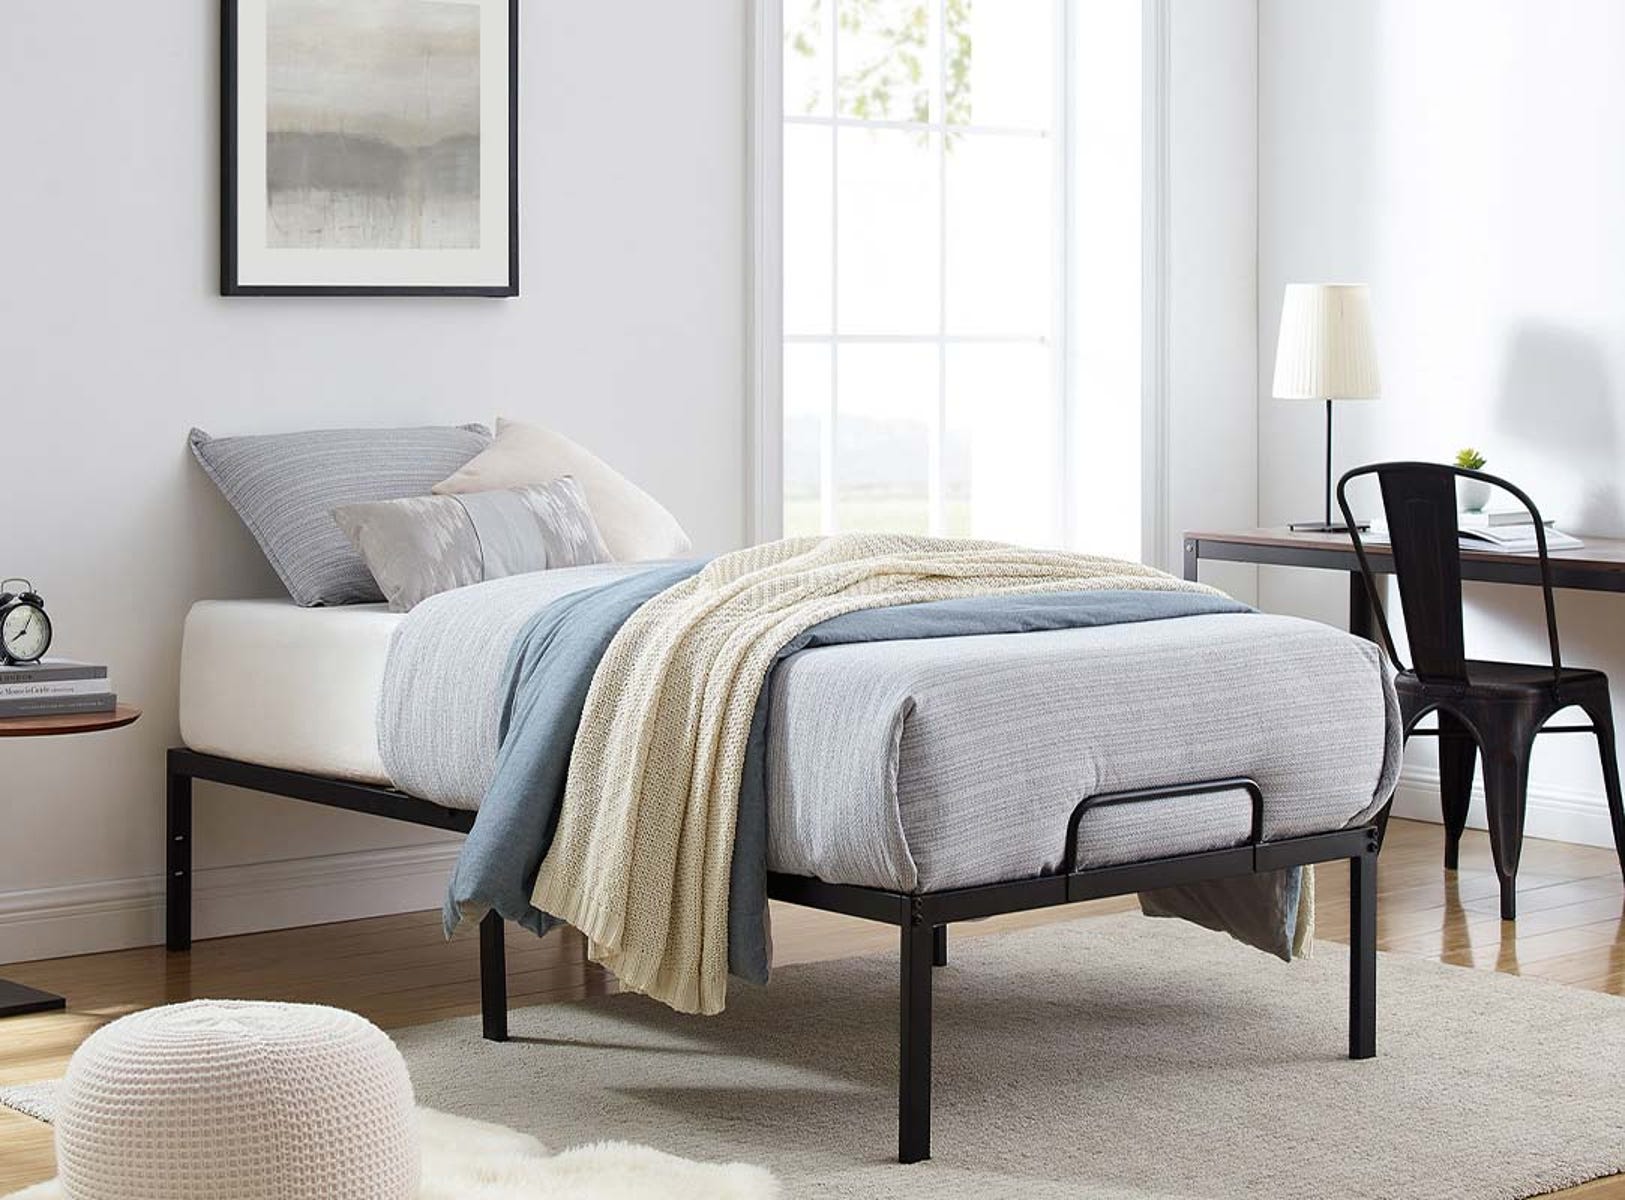 buy bed frame and mattress together